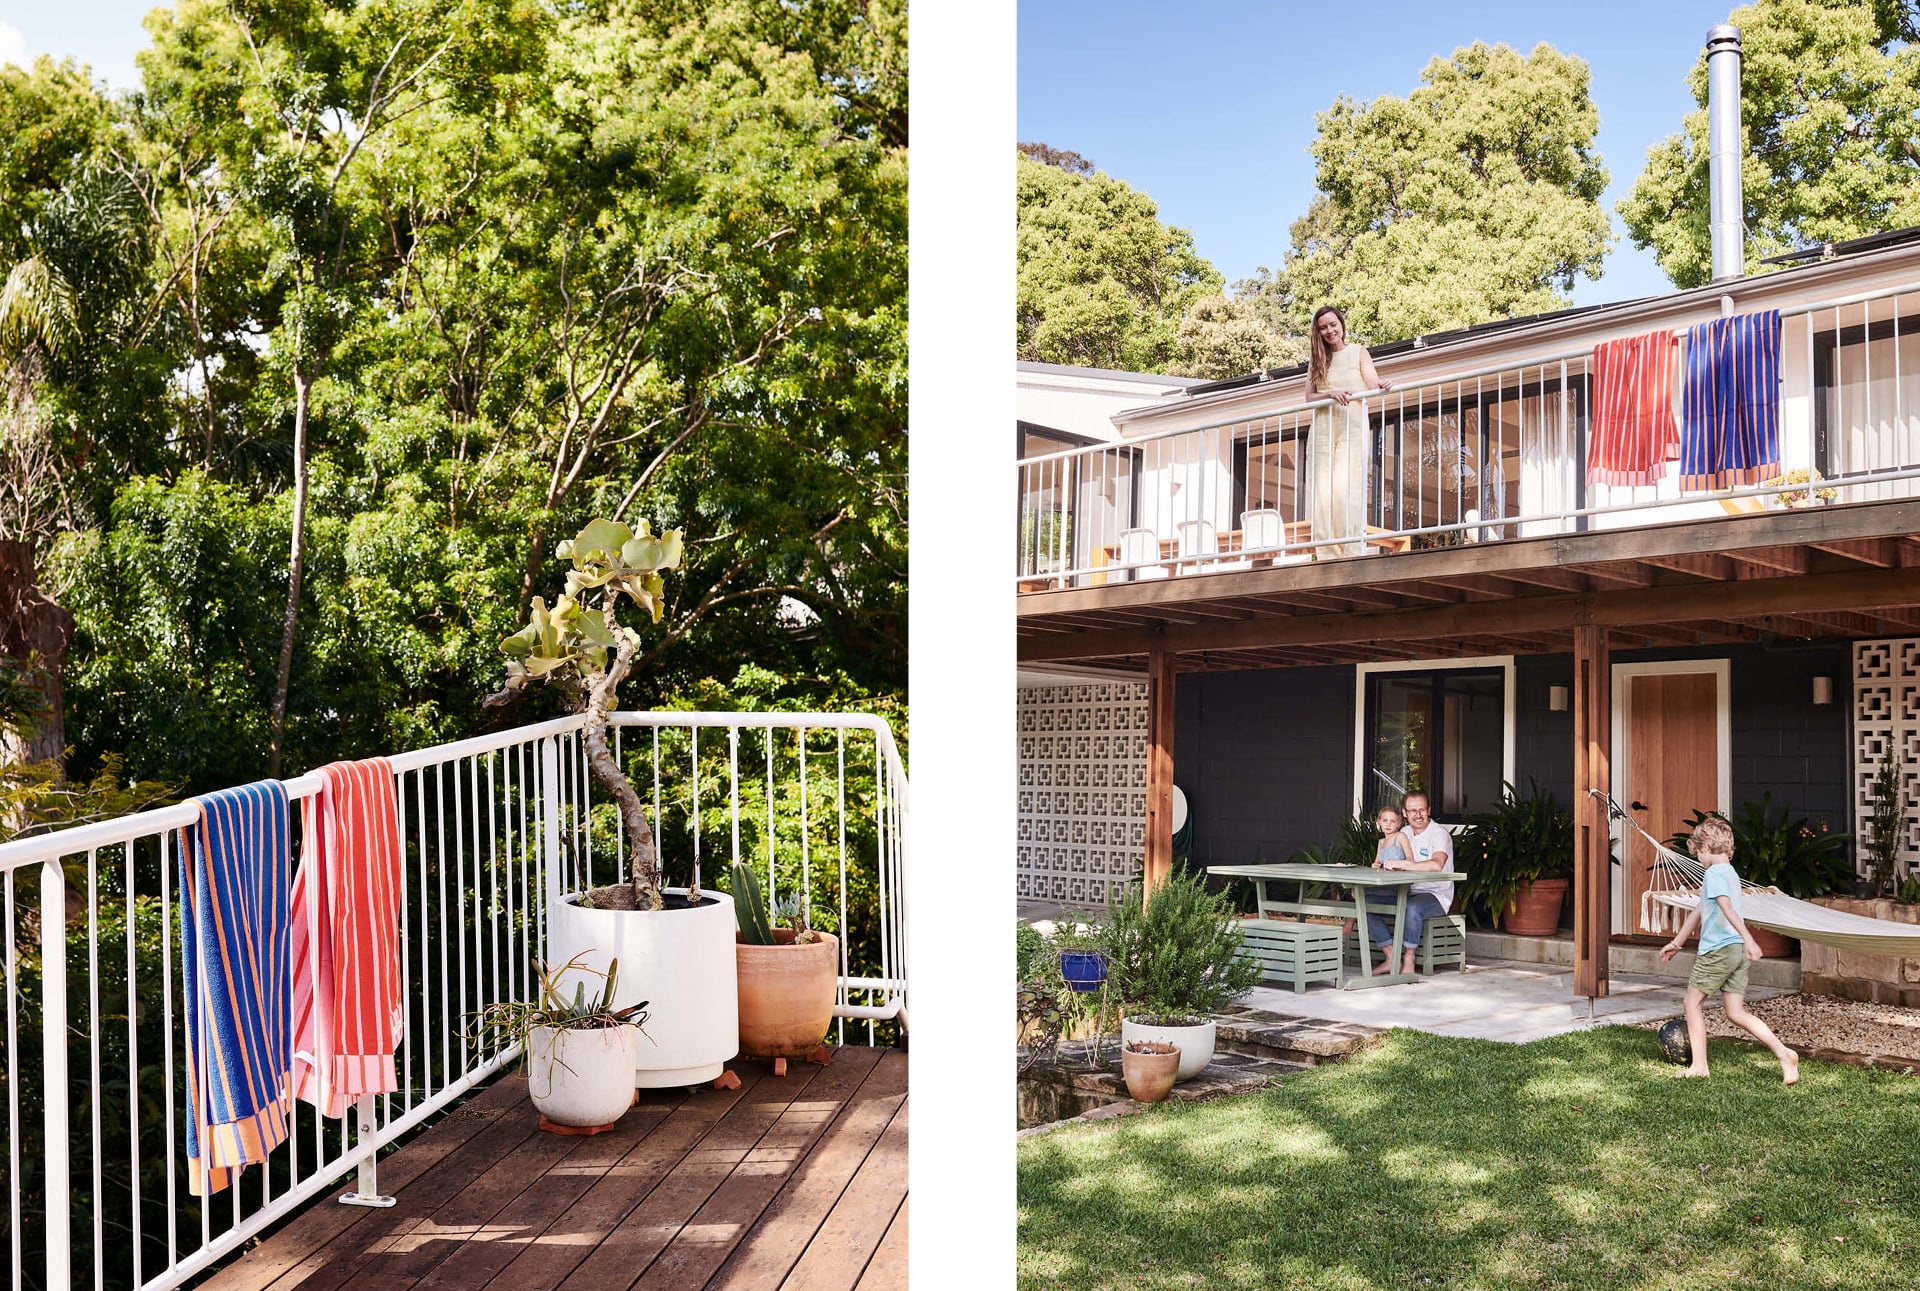 split image. left side two striped kids beach towel hand over balcony railing, with dense green trees in background. right side shot looking back at house, xanthe stands at balcony with kids towels, sam clover and ace play in backyard on level below.